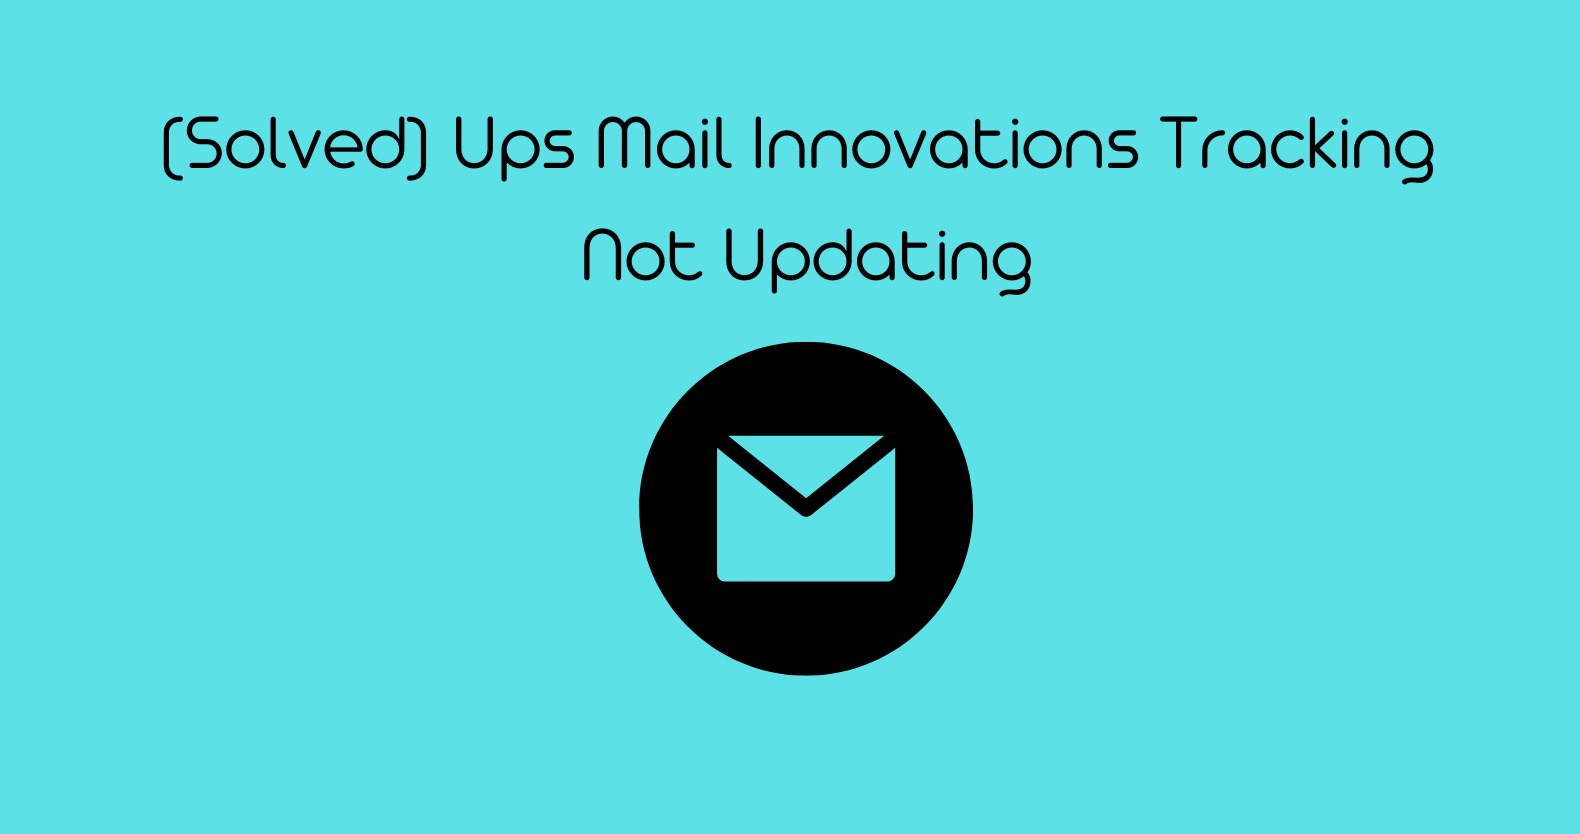 Ups Mail Innovations Tracking Not Updating